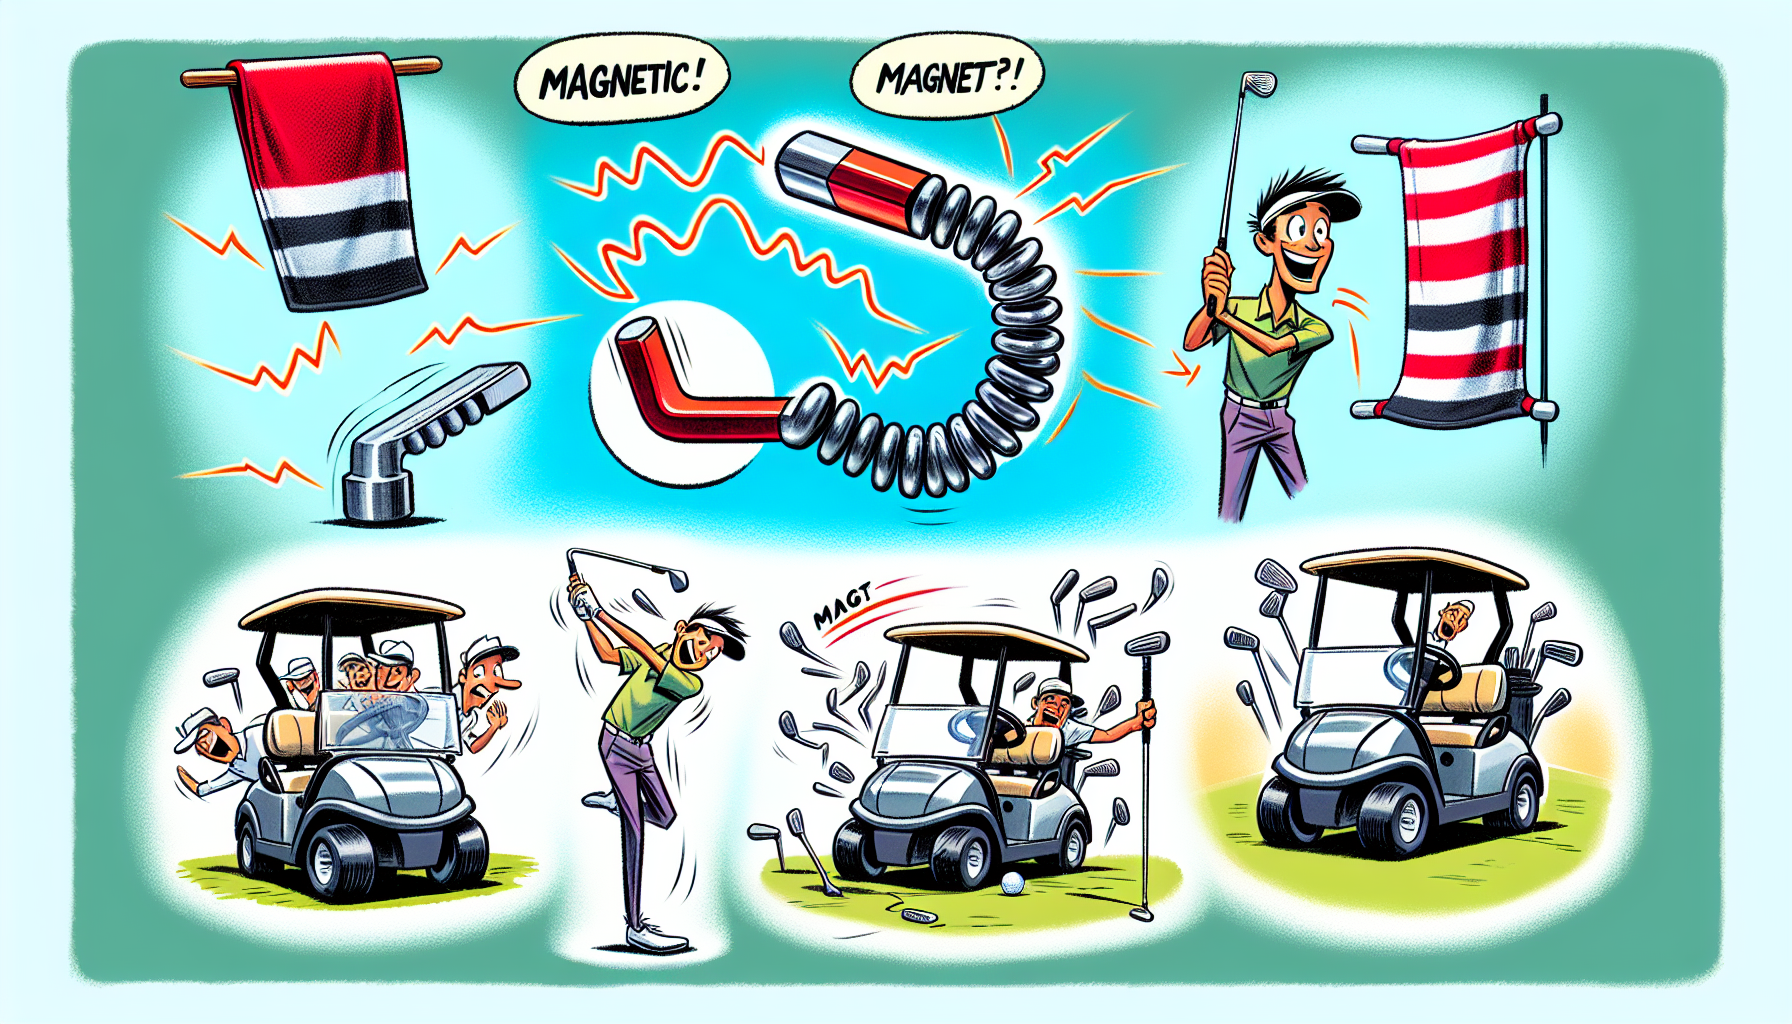 Cartoon depiction of versatile attachment options for magnetic golf towels